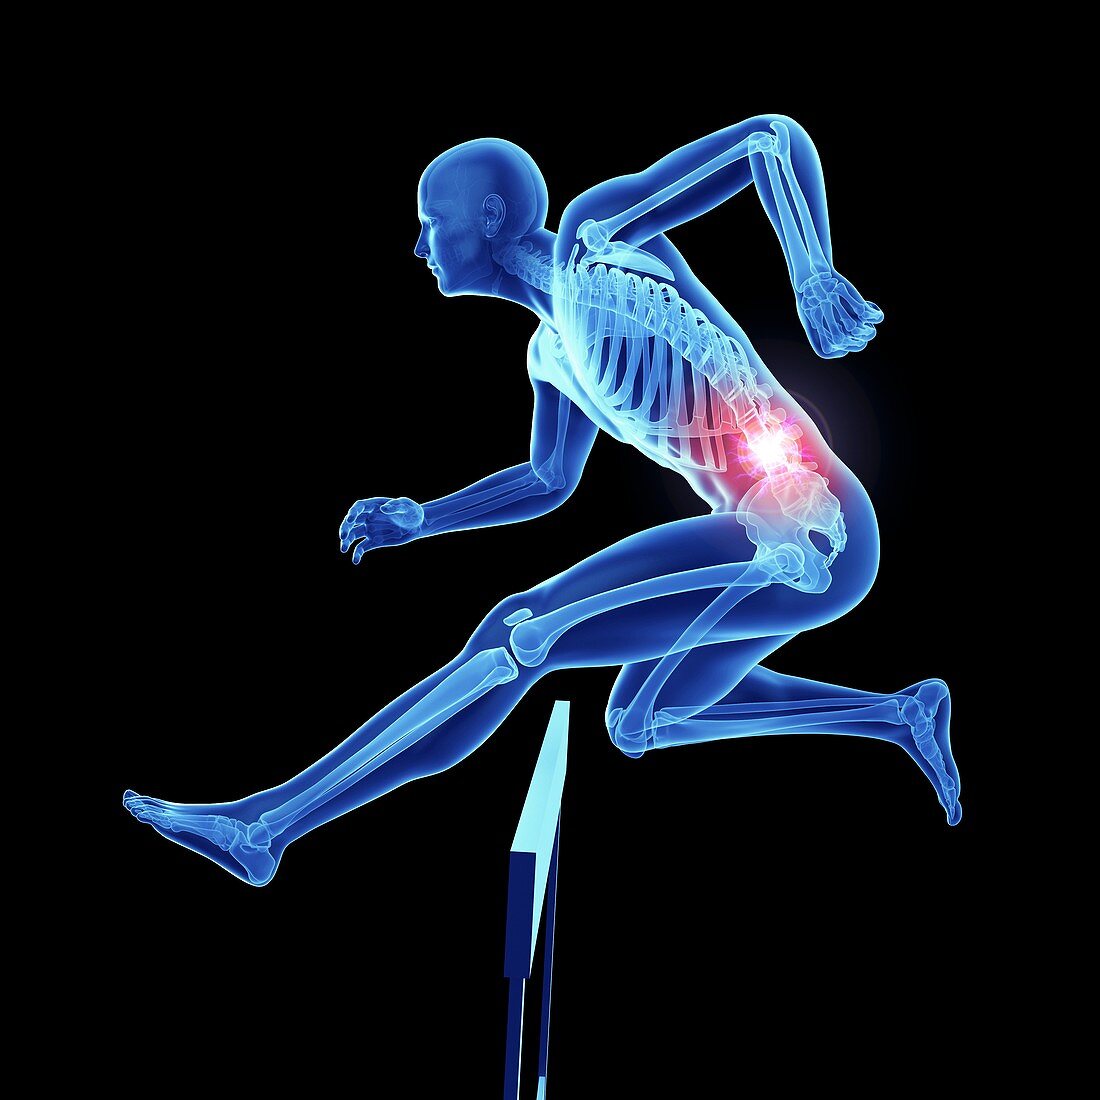 Illustration of an athlete's painful back